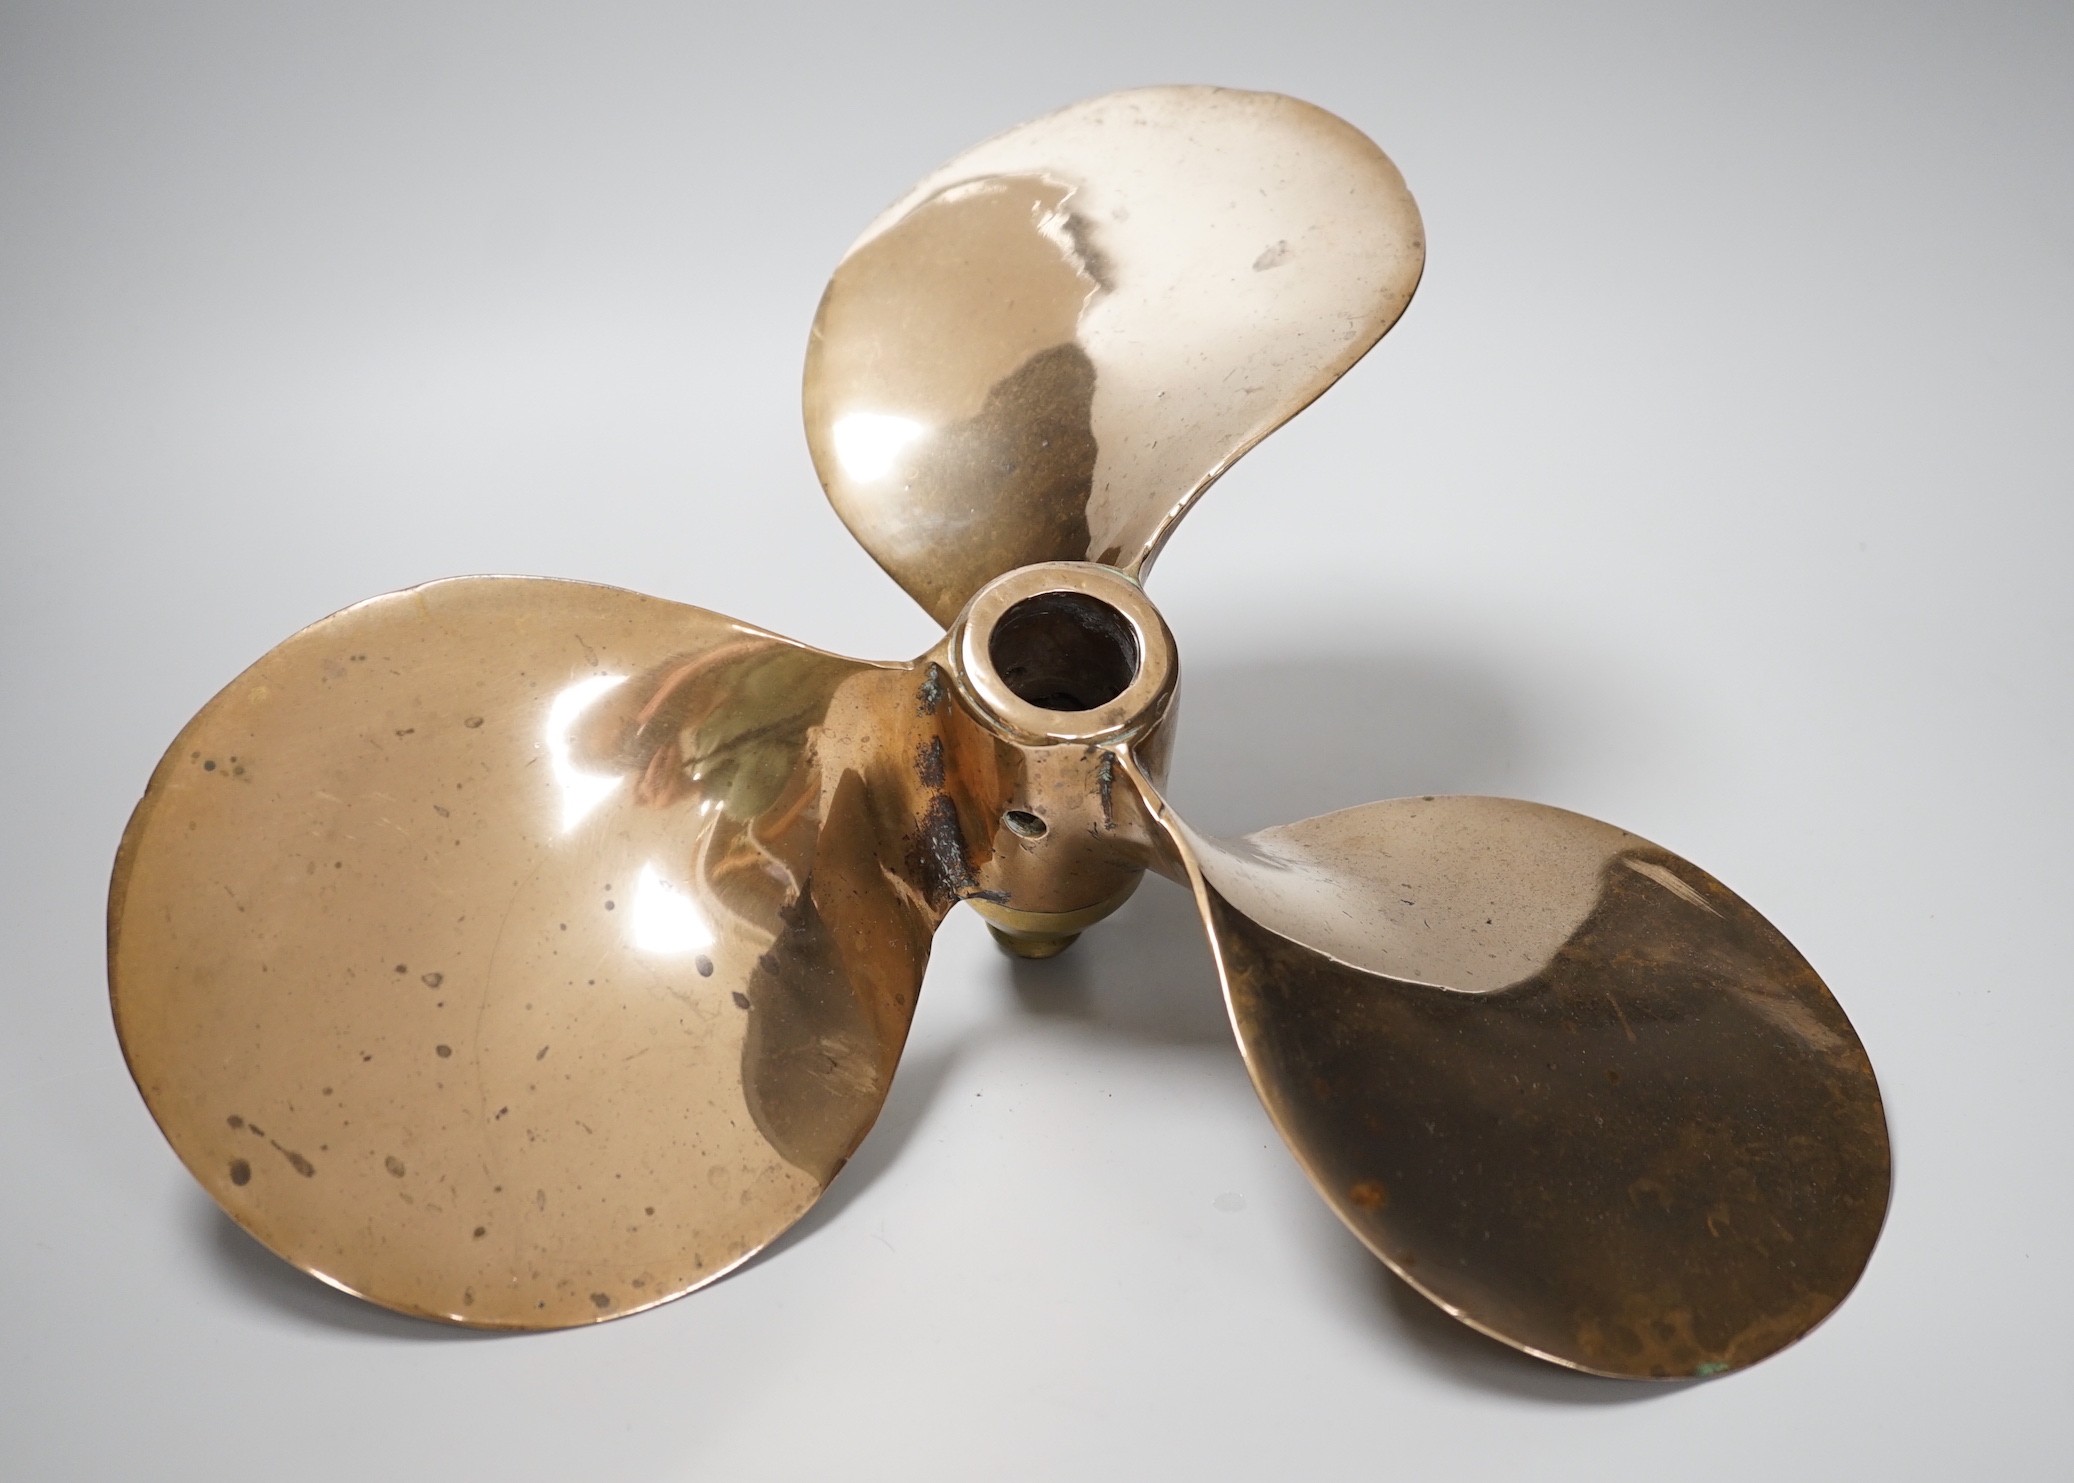 A lifeboat bronze propeller. 35cm diameter approx. salvaged from Chittagong ship yard between 1984-